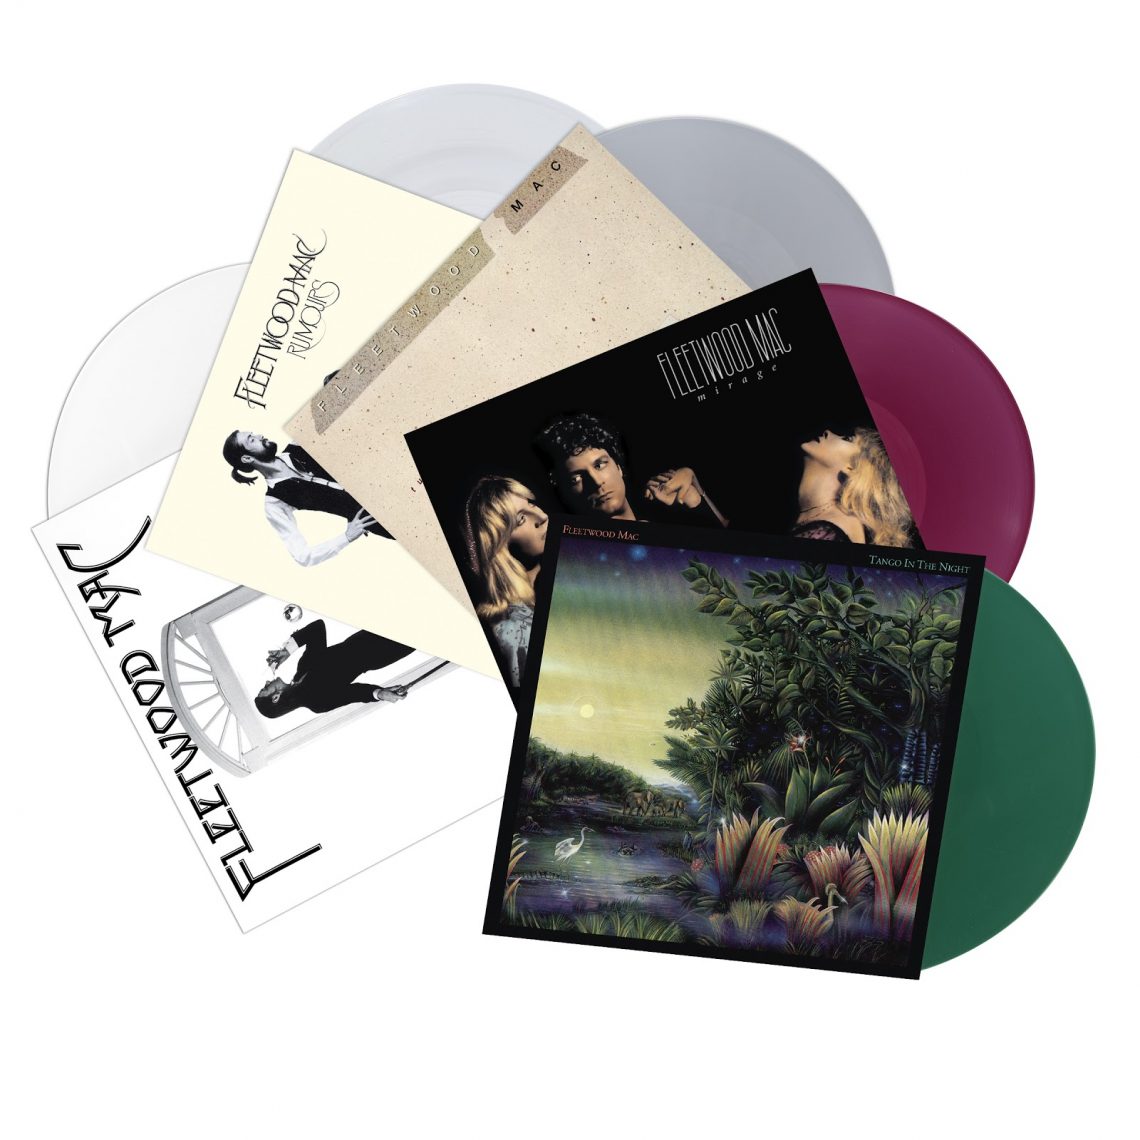 FLEETWOOD MAC CLASSIC ALBUMS  TO BE REISSUED ON COLOURED VINYL